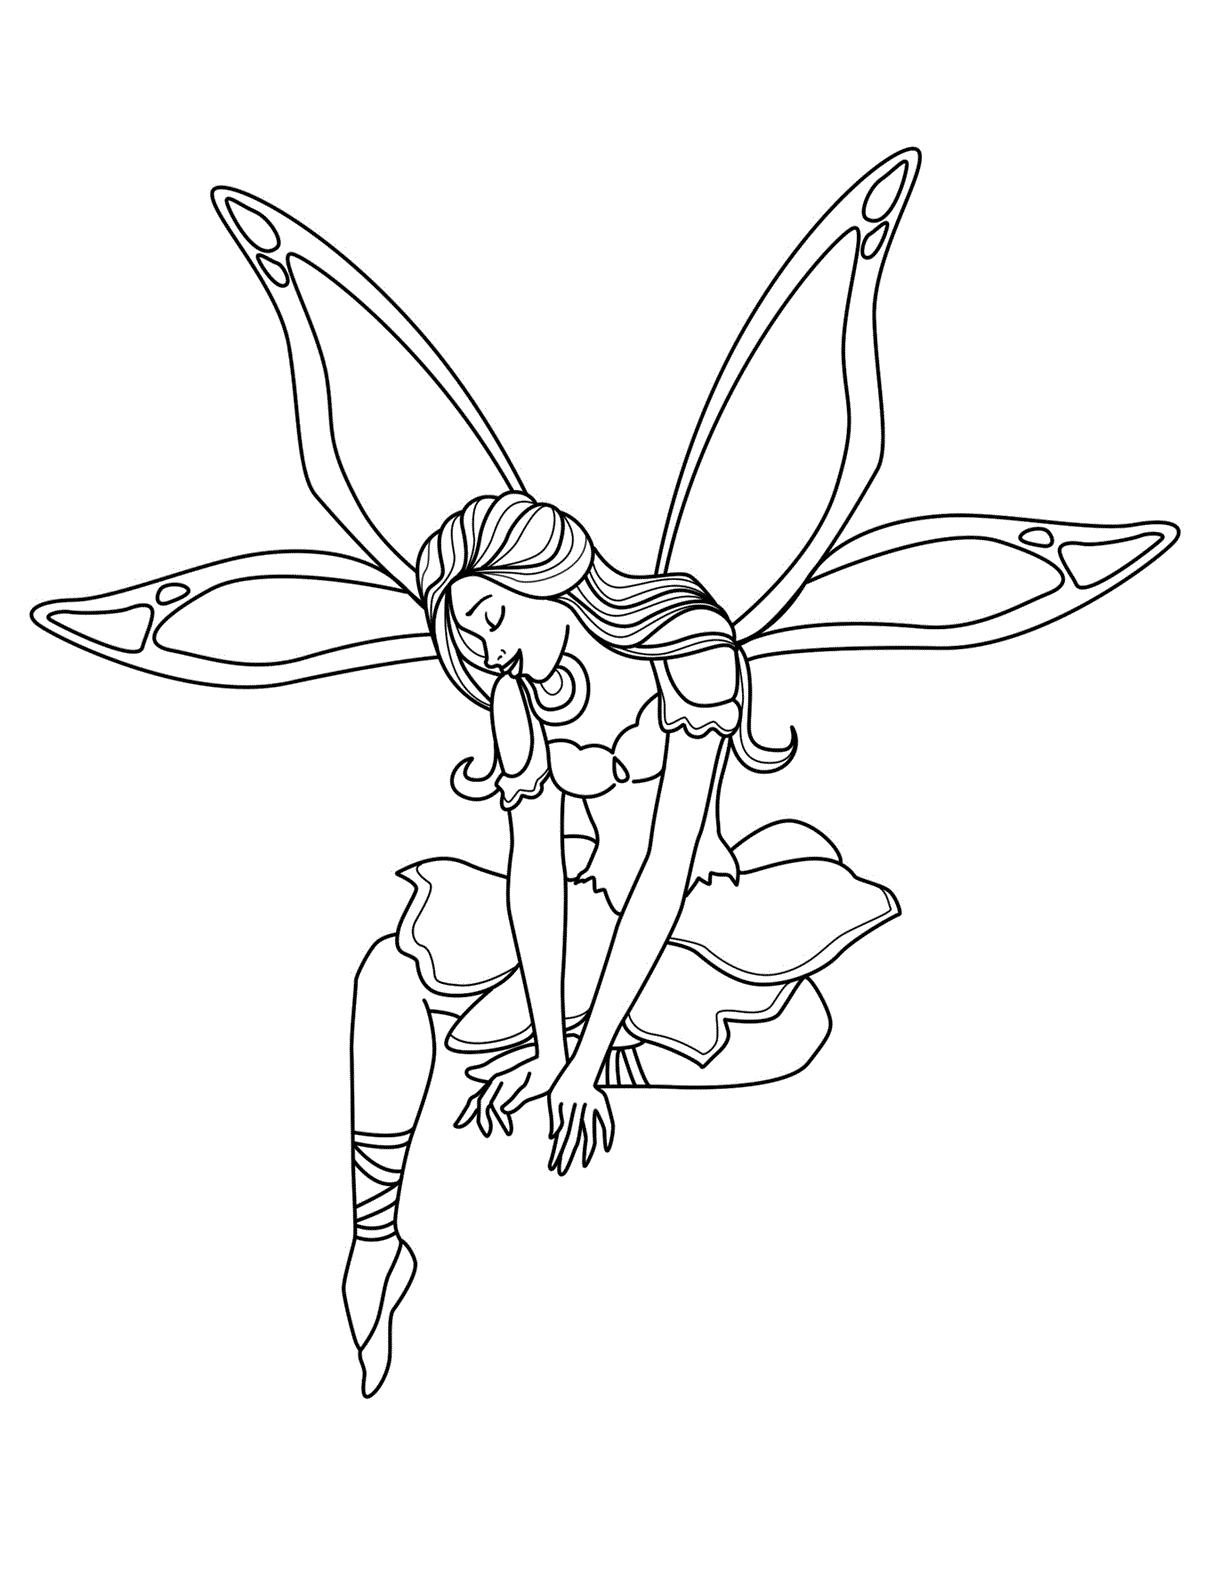 Fairy Coloring Pages Disney Fairy Pictures to Printable 2021 2326 Coloring4free